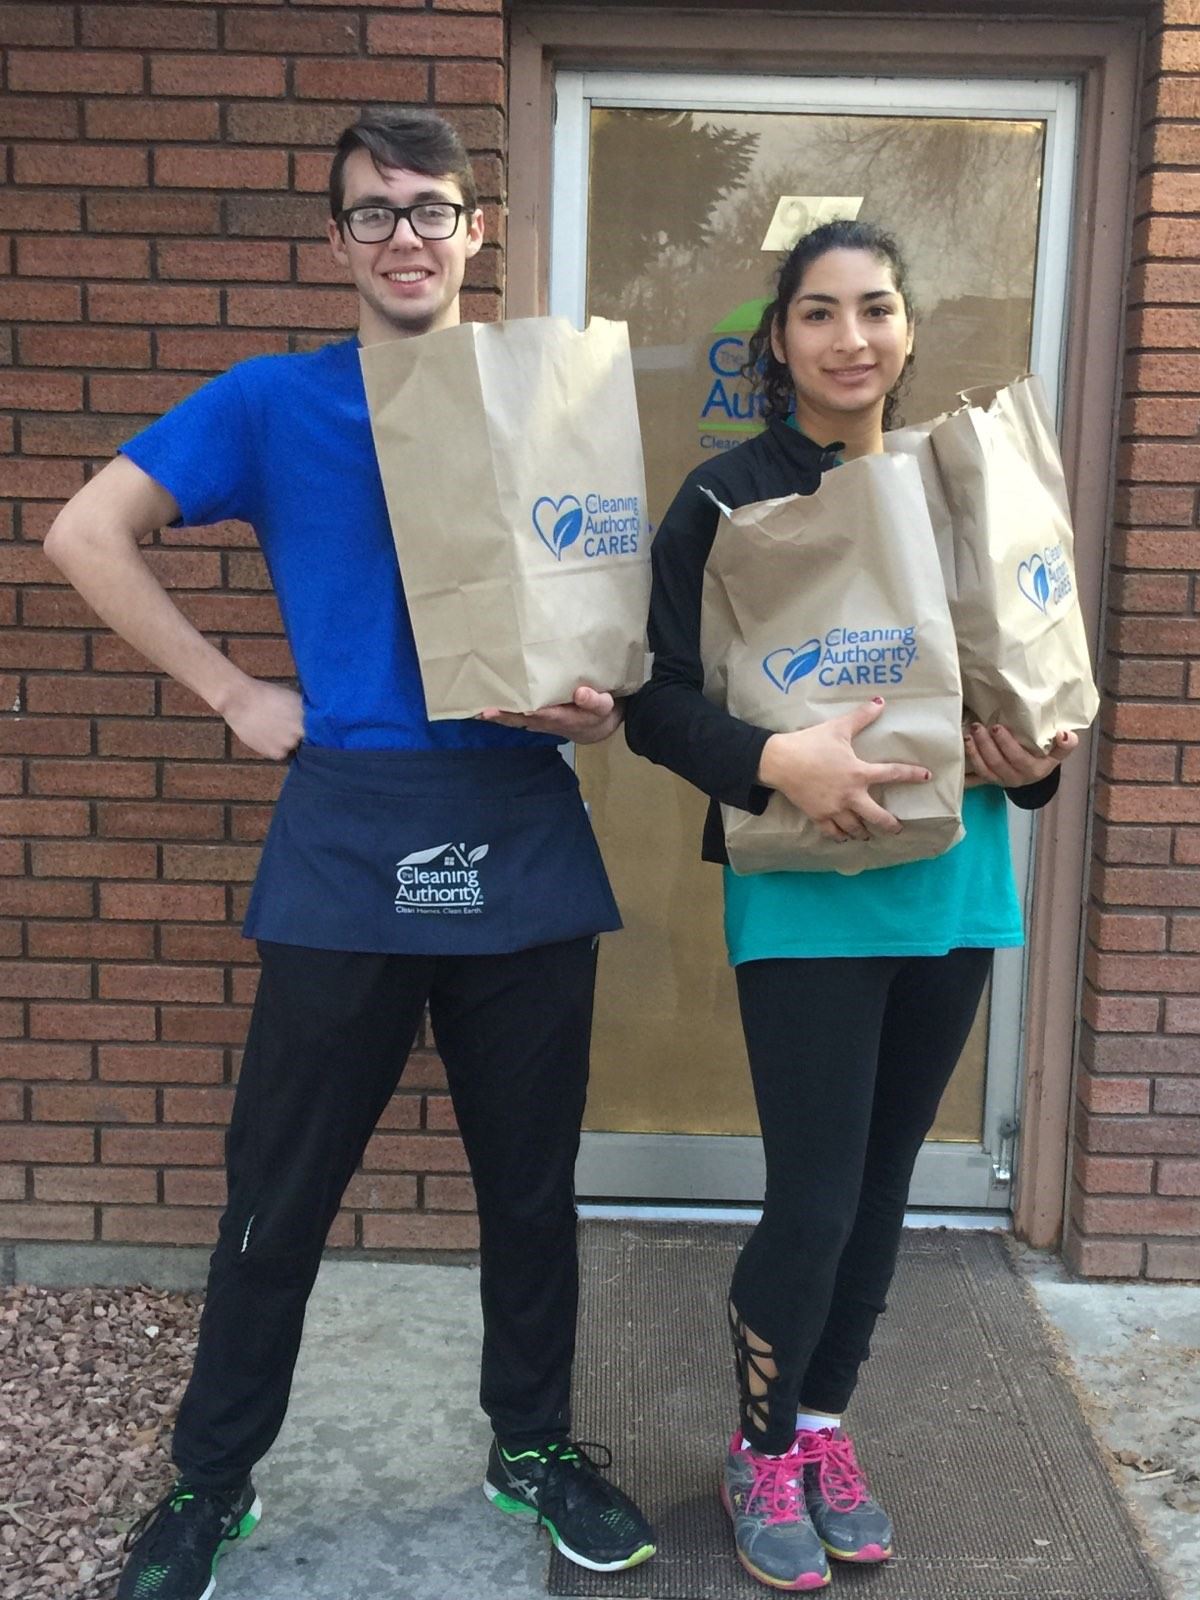 Two members of the TCA Provo team pose with donations collected for a local charity.